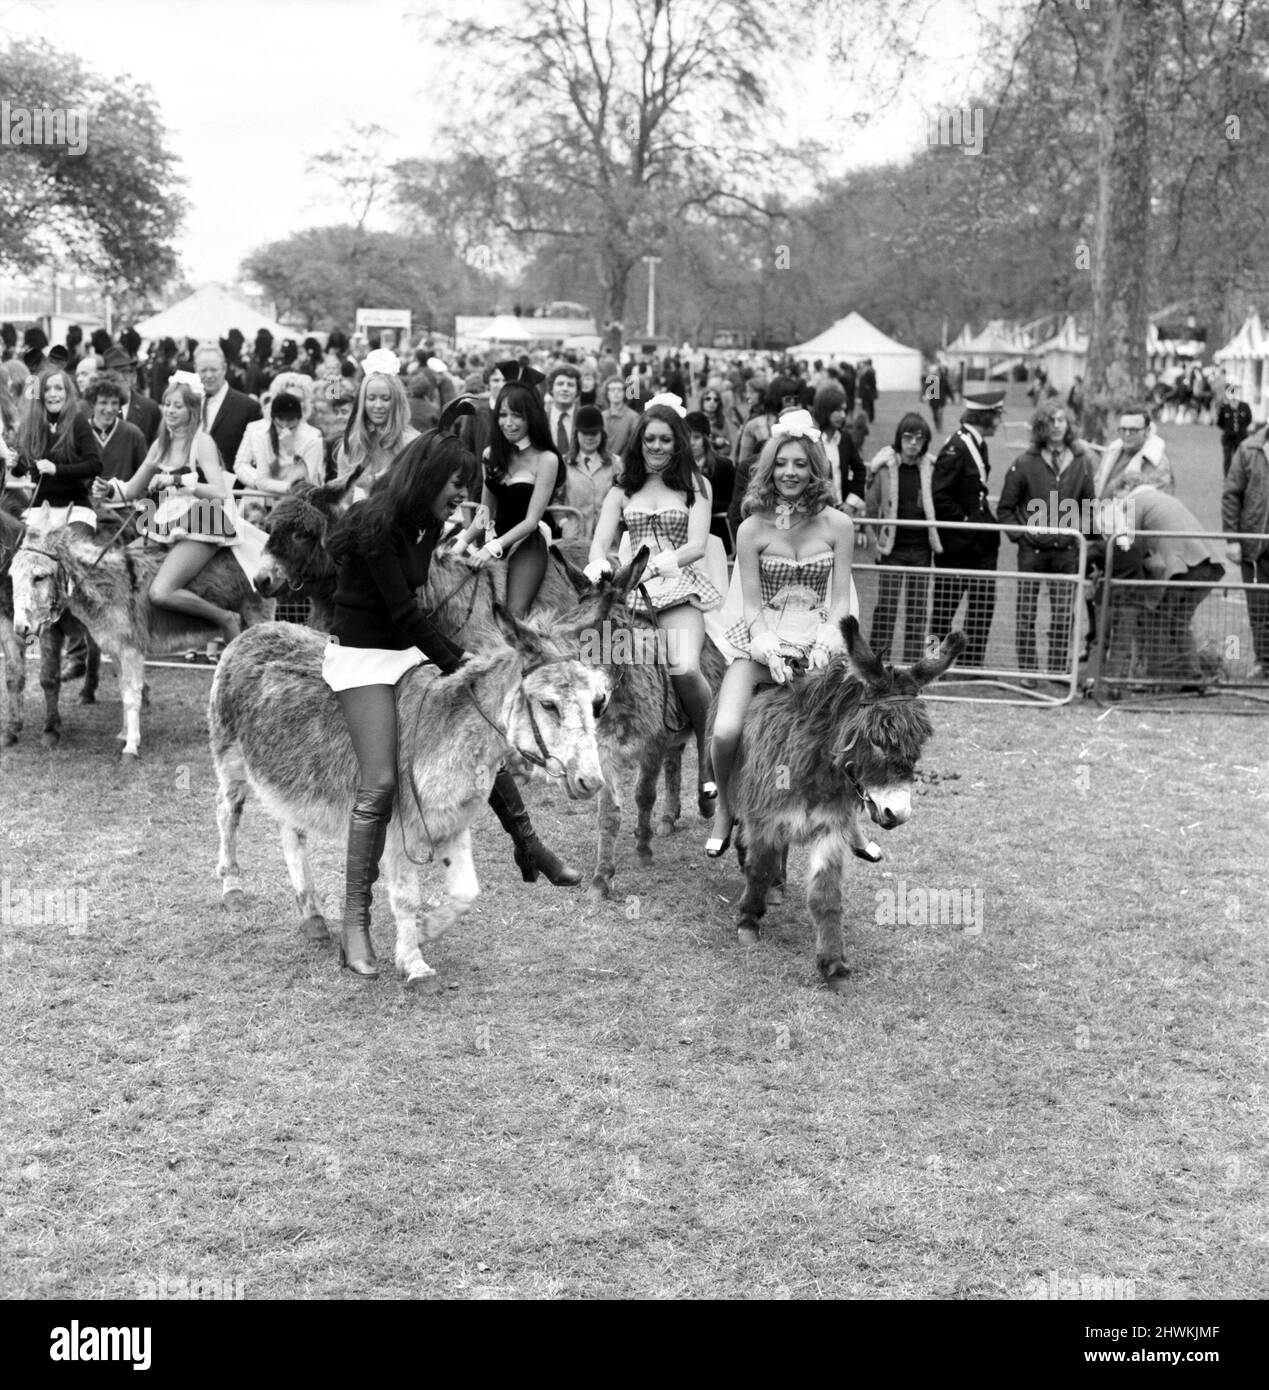 Donkey Derby held for charity at Festival Gardens. Bunny girls and Penthouse pets in a race which was declared as dead heat by the organisers. April 1972 72-04585-006 Stock Photo